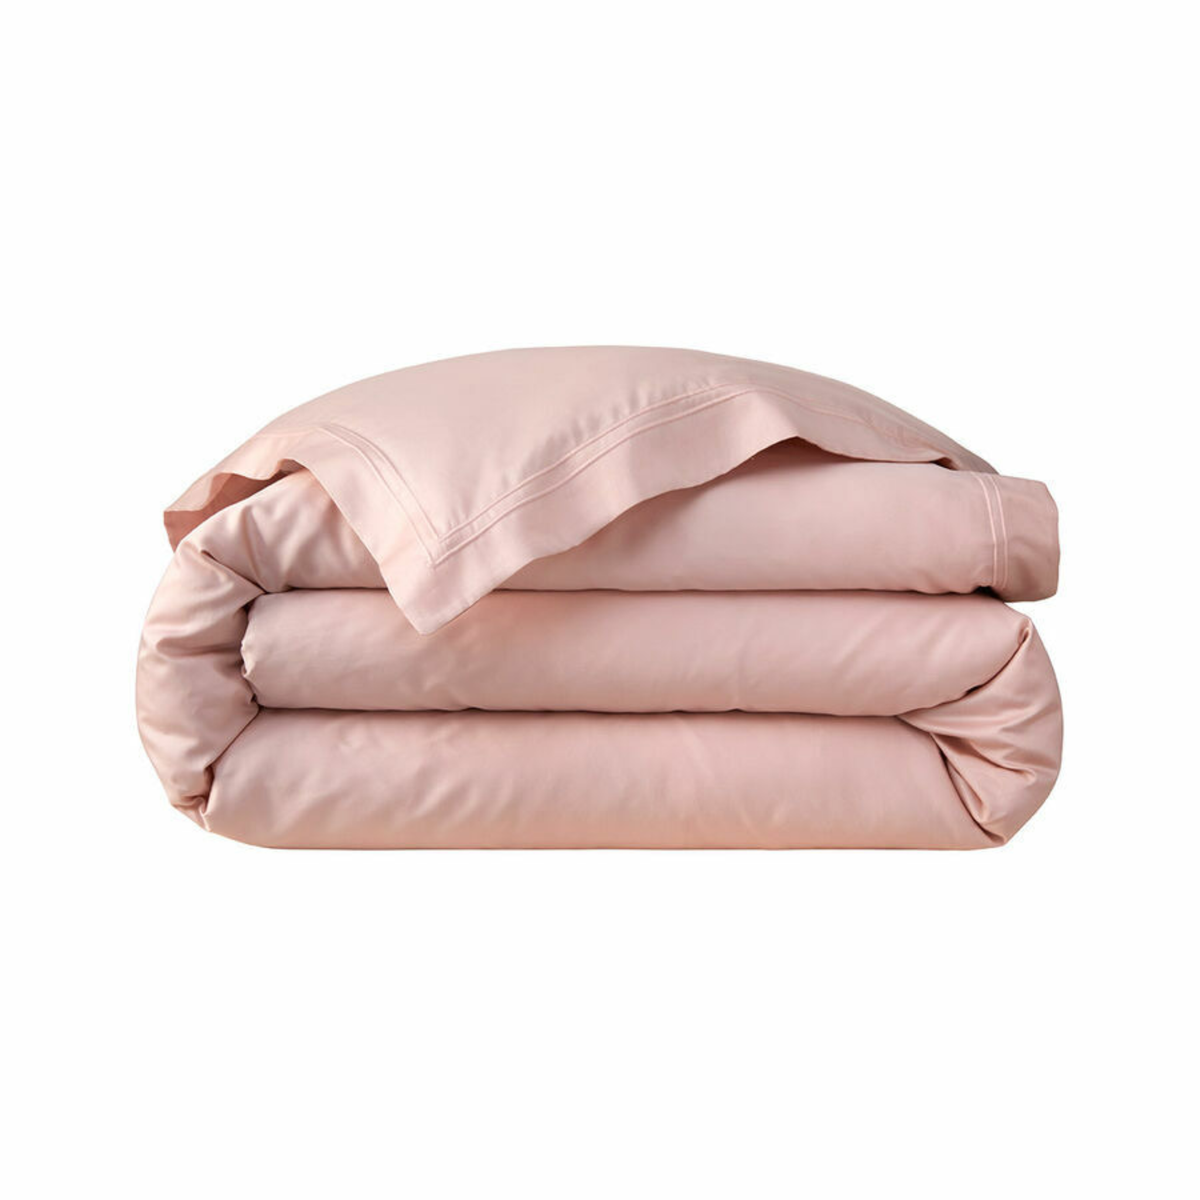 Folded Duvet Cover of Yves Delorme Triomphe Bedding in Poudre Color